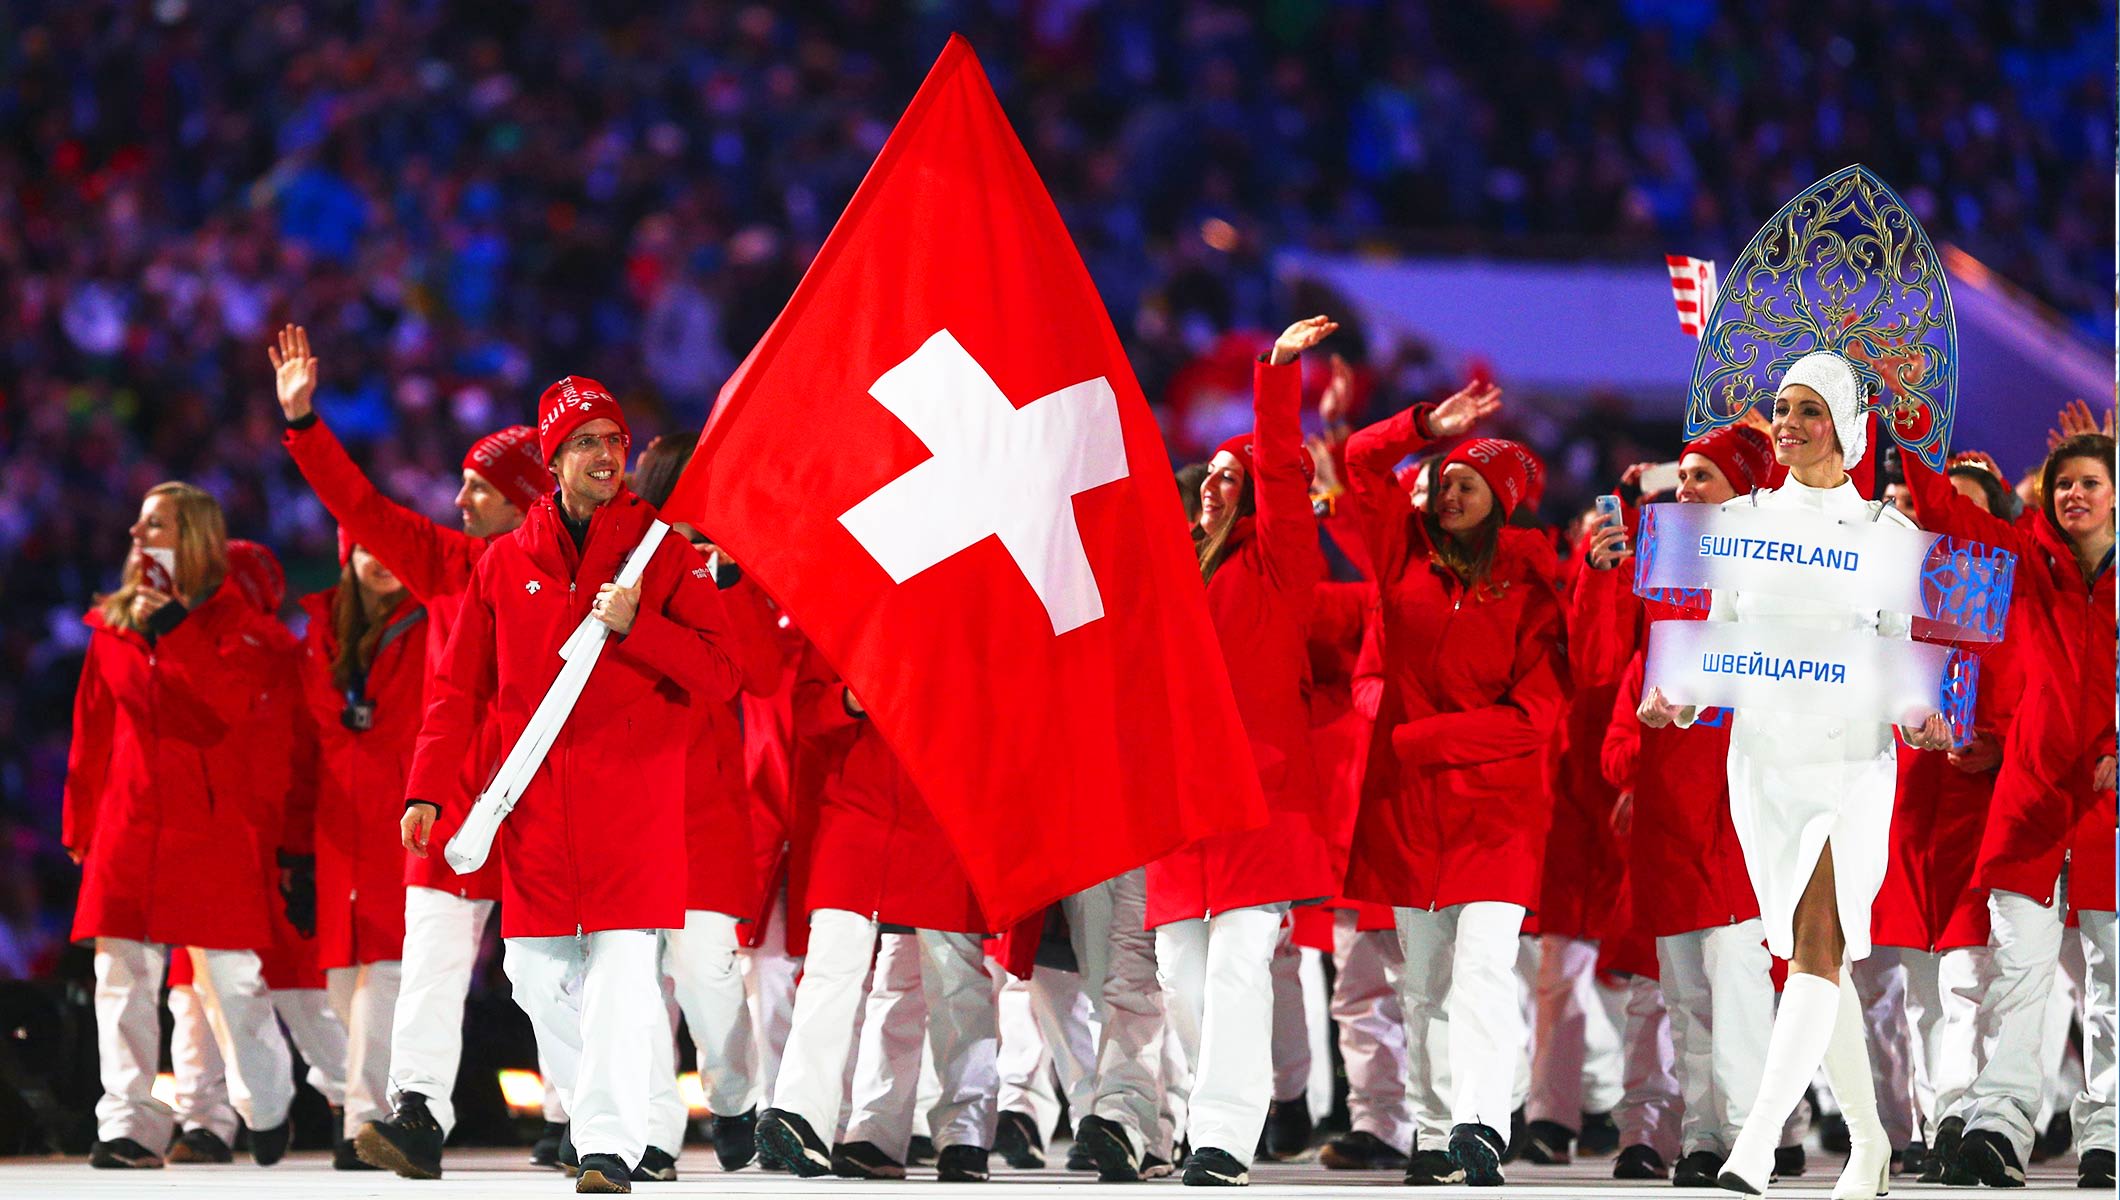 Simon Ammann was the flag-bearer for Switzerland in the Opening Ceremony of Sochi 2014